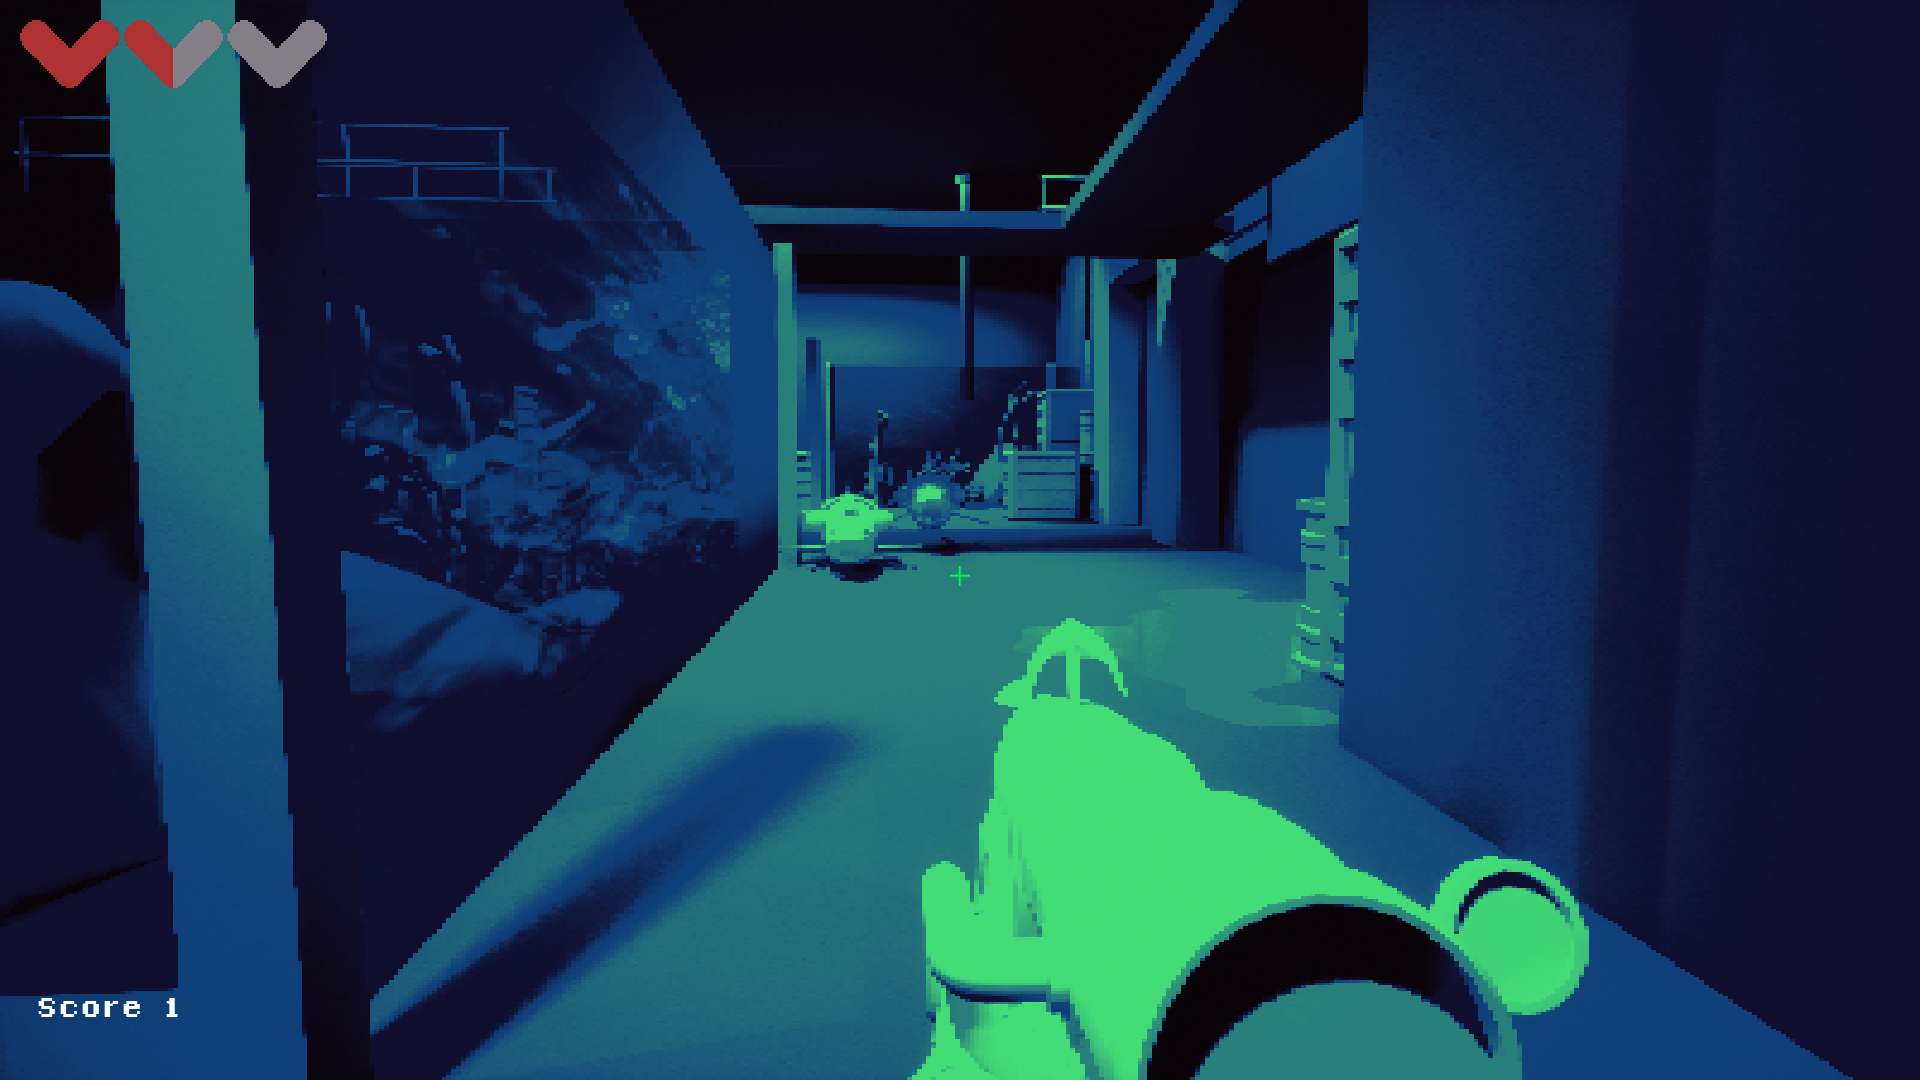 A screenshot from the game "SHORK" a first person shooter.